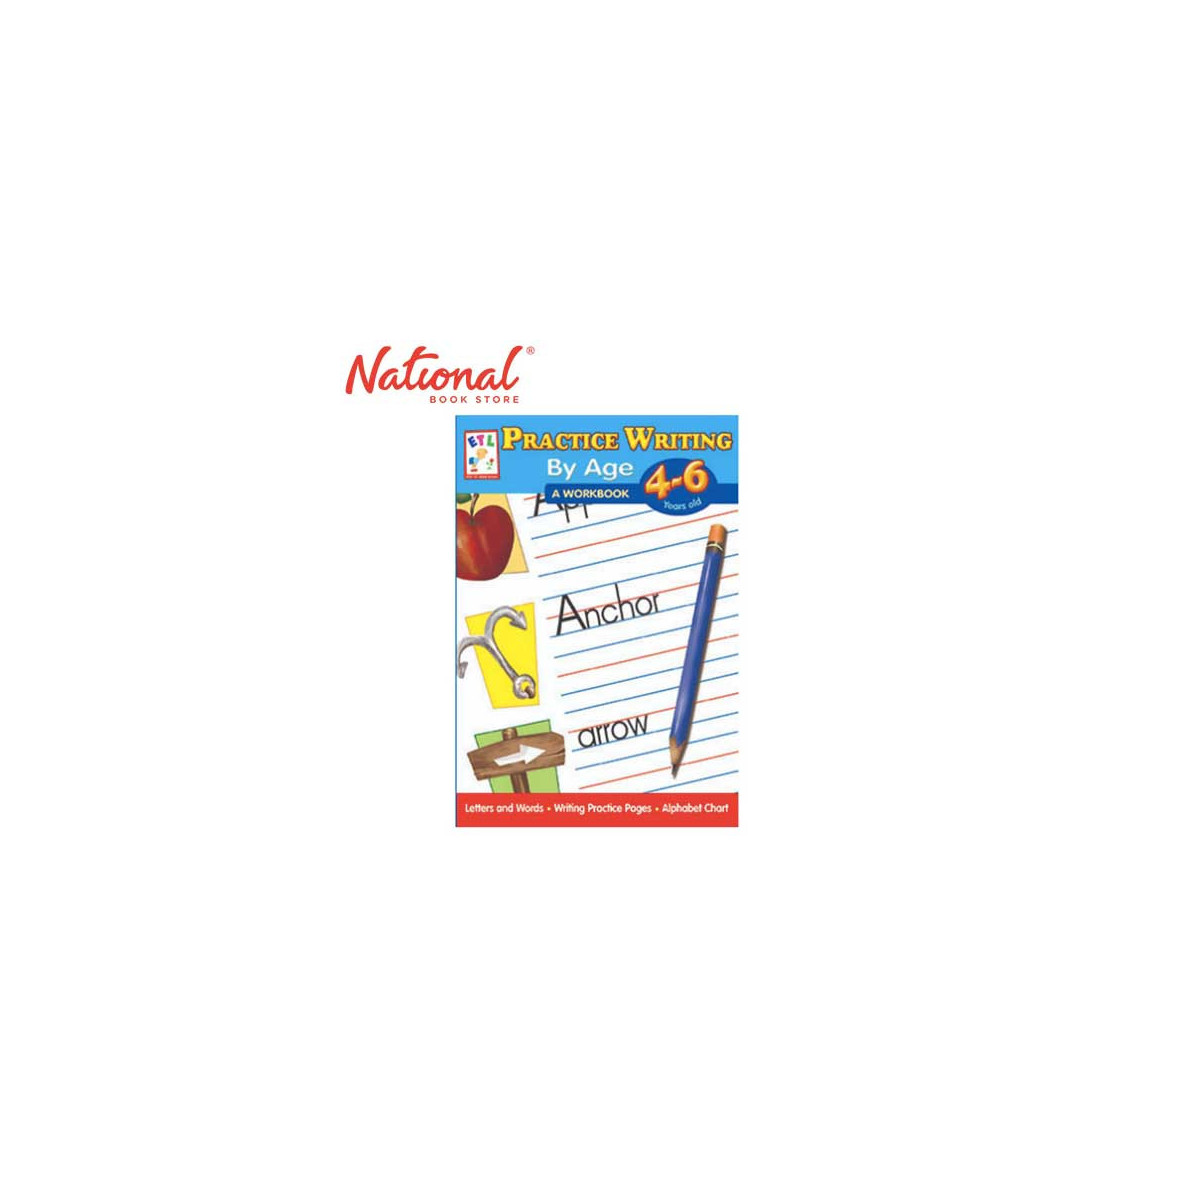 Practice Writing By Age 4-6 Workbook - Trade Paperback